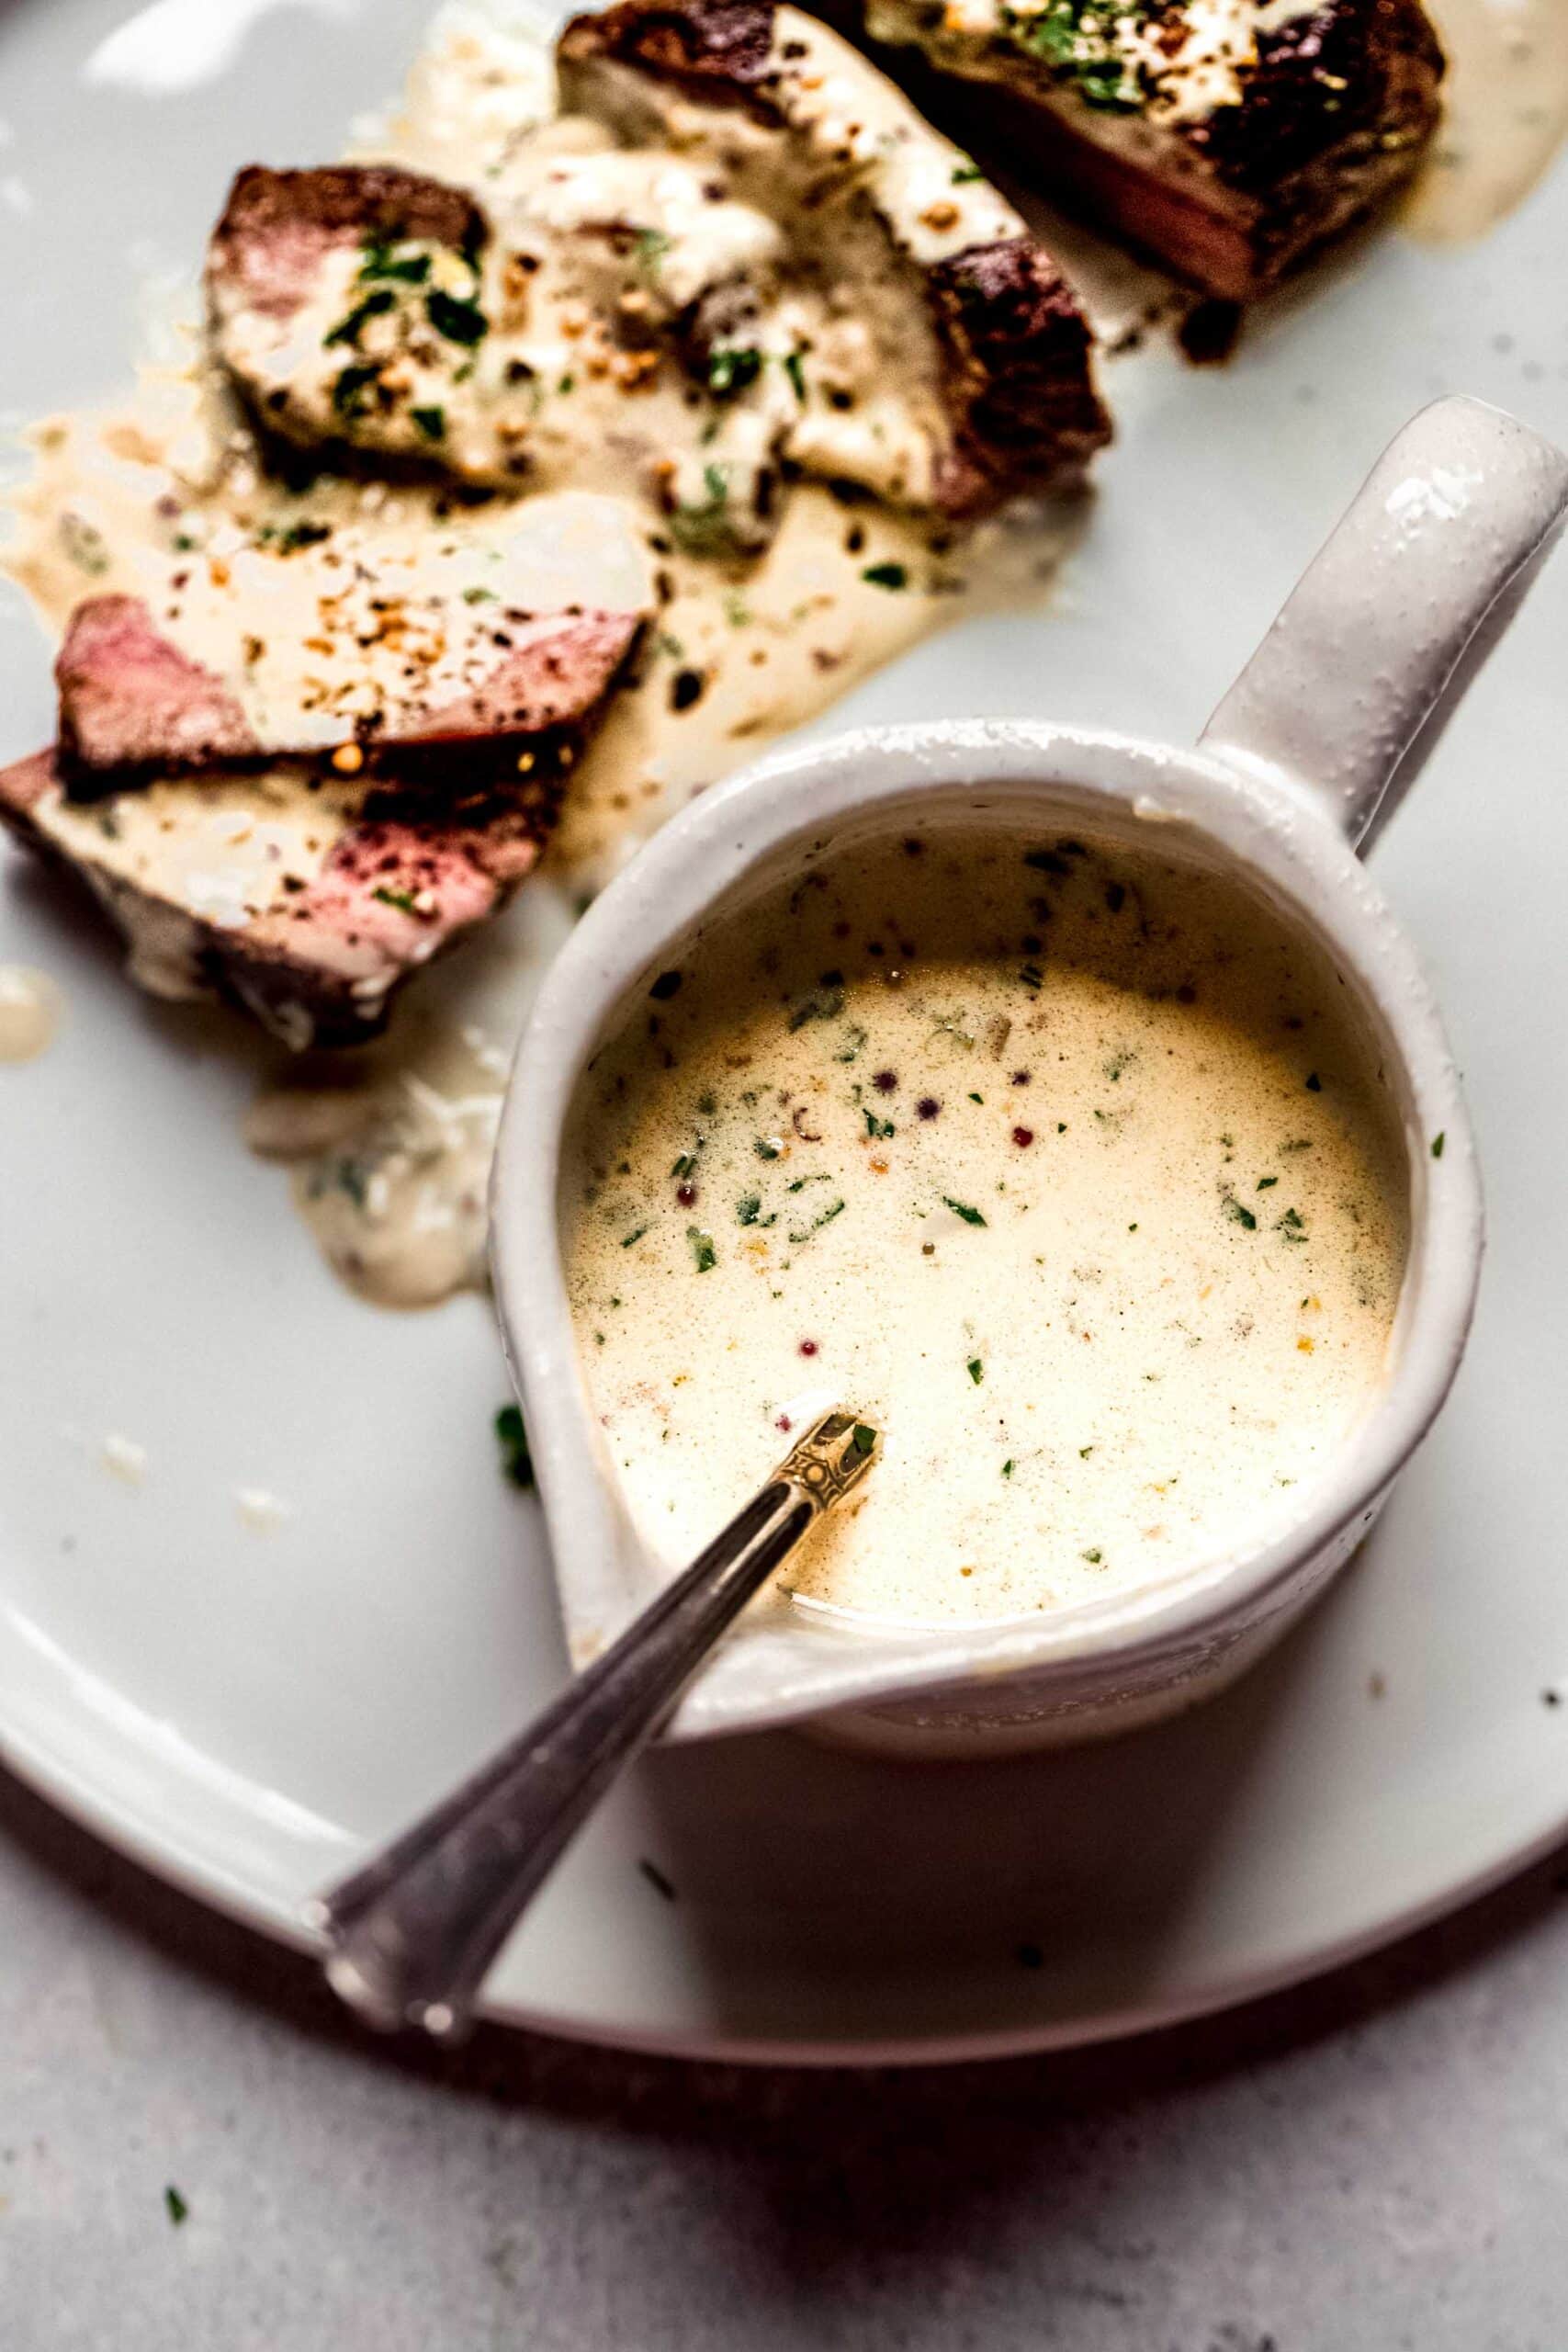 Mustard sauce for steak in small pouring vessel with spoon.